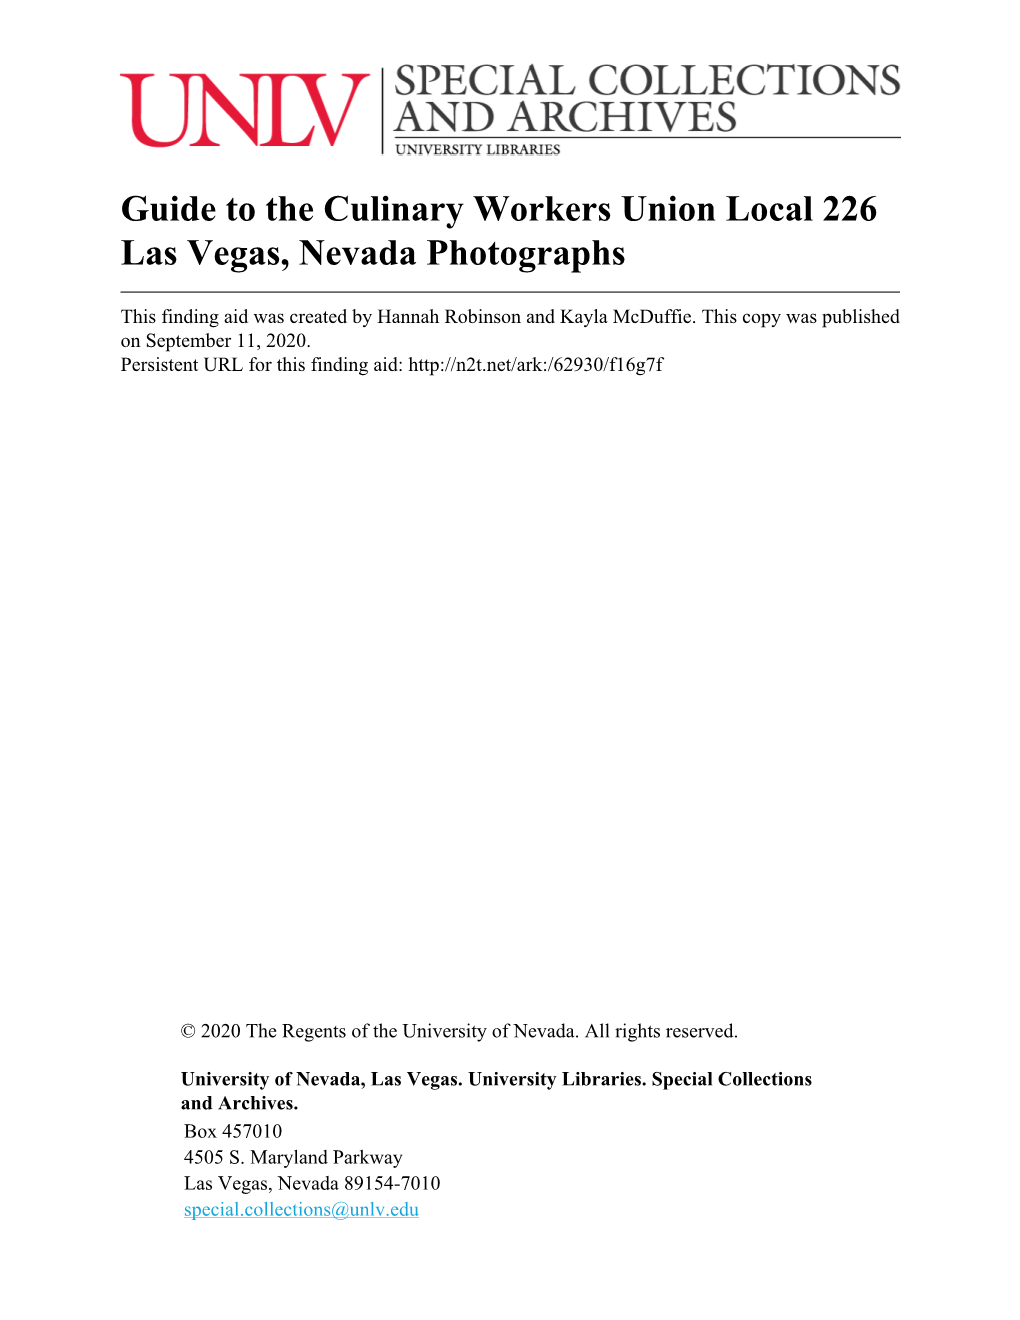 Guide to the Culinary Workers Union Local 226 Las Vegas, Nevada Photographs